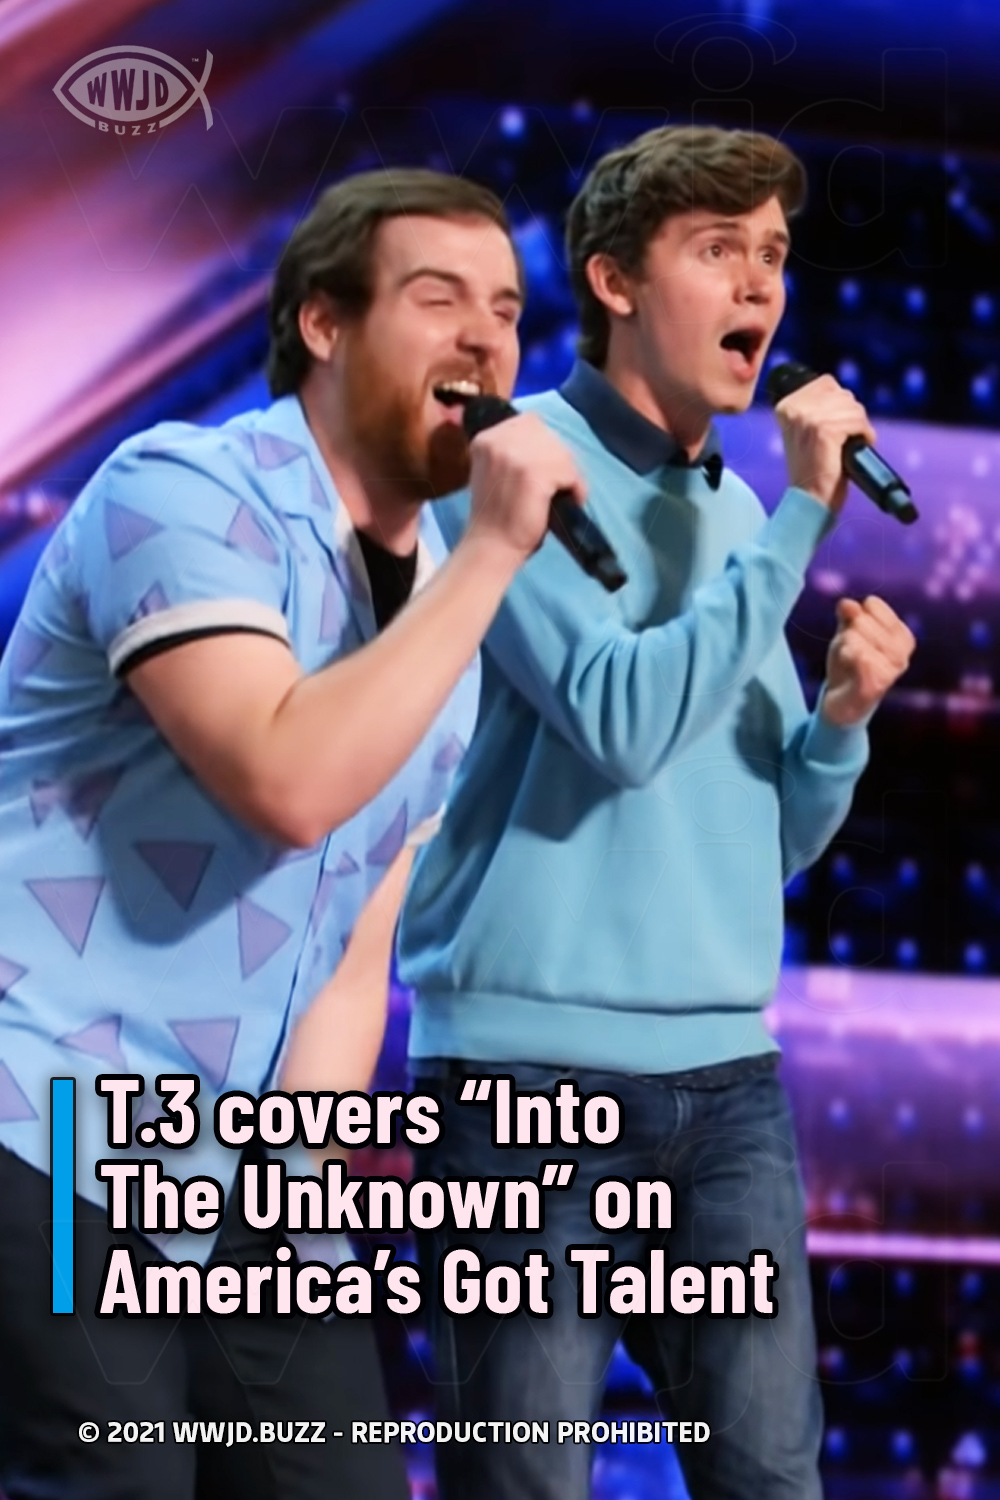 T.3 covers “Into The Unknown” on America’s Got Talent